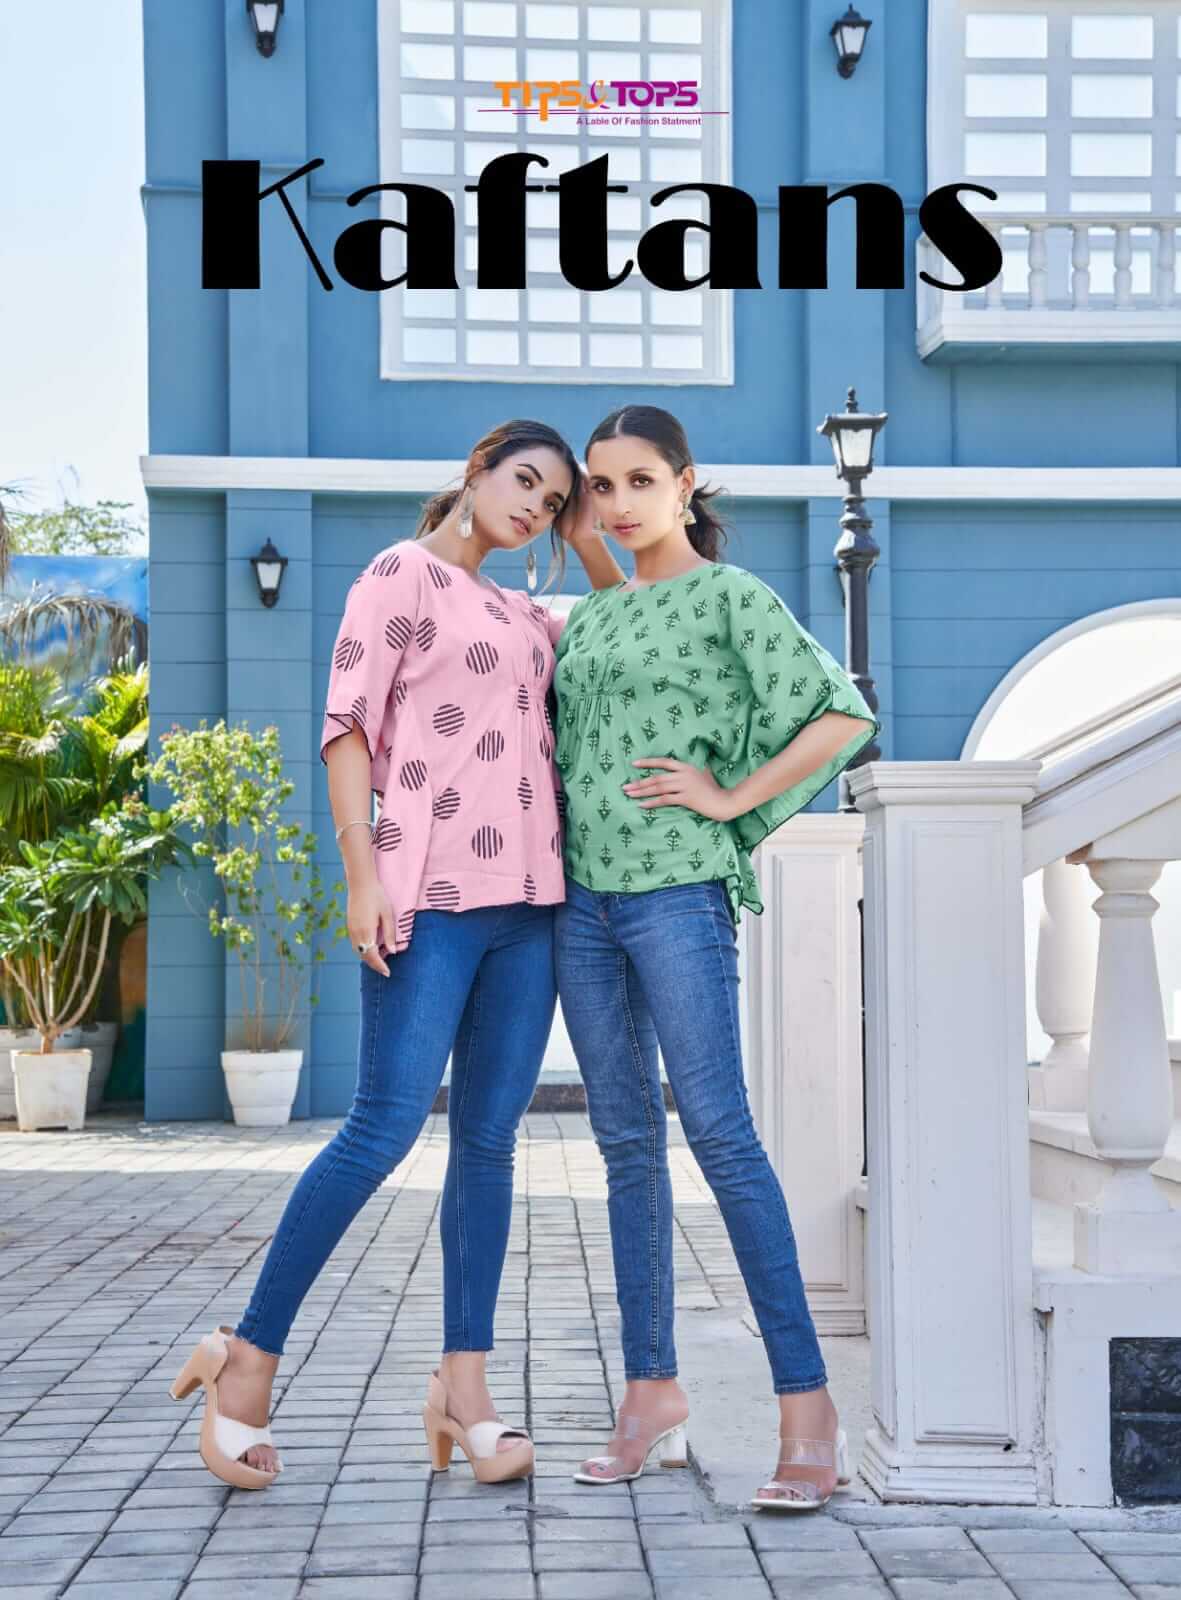 Tips And Tops Kaftans Tops Wholesale Catalog. Purchase Full Catalog of Kaftan Tops In Wholesale Price Online